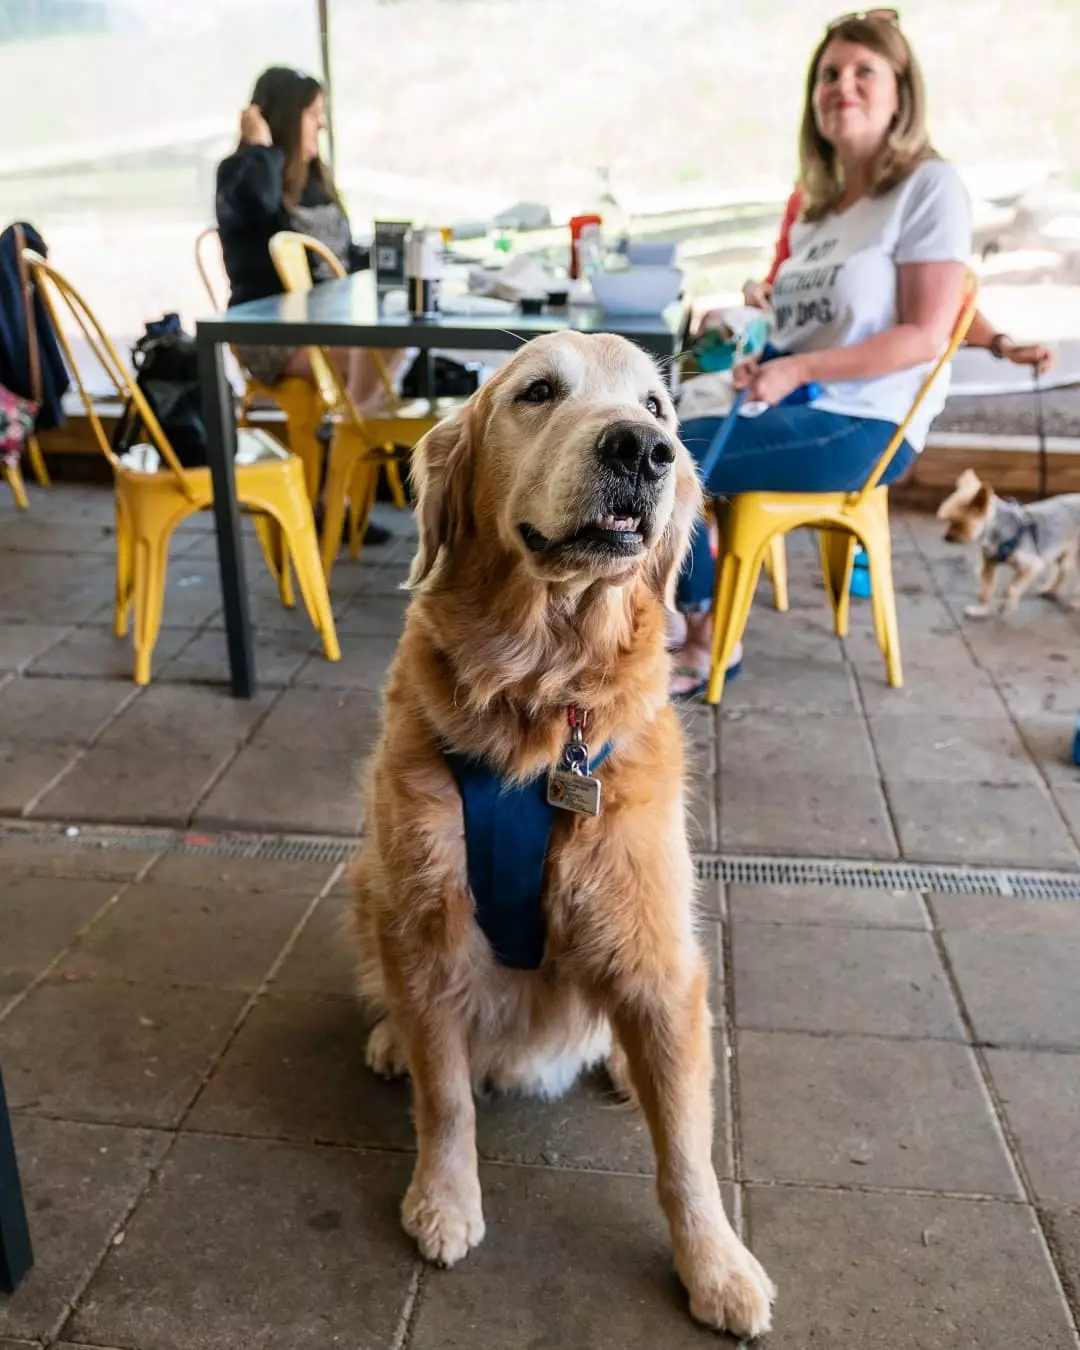 Well-behaved pups are welcome to join their humans at Three Notch'd Brewery